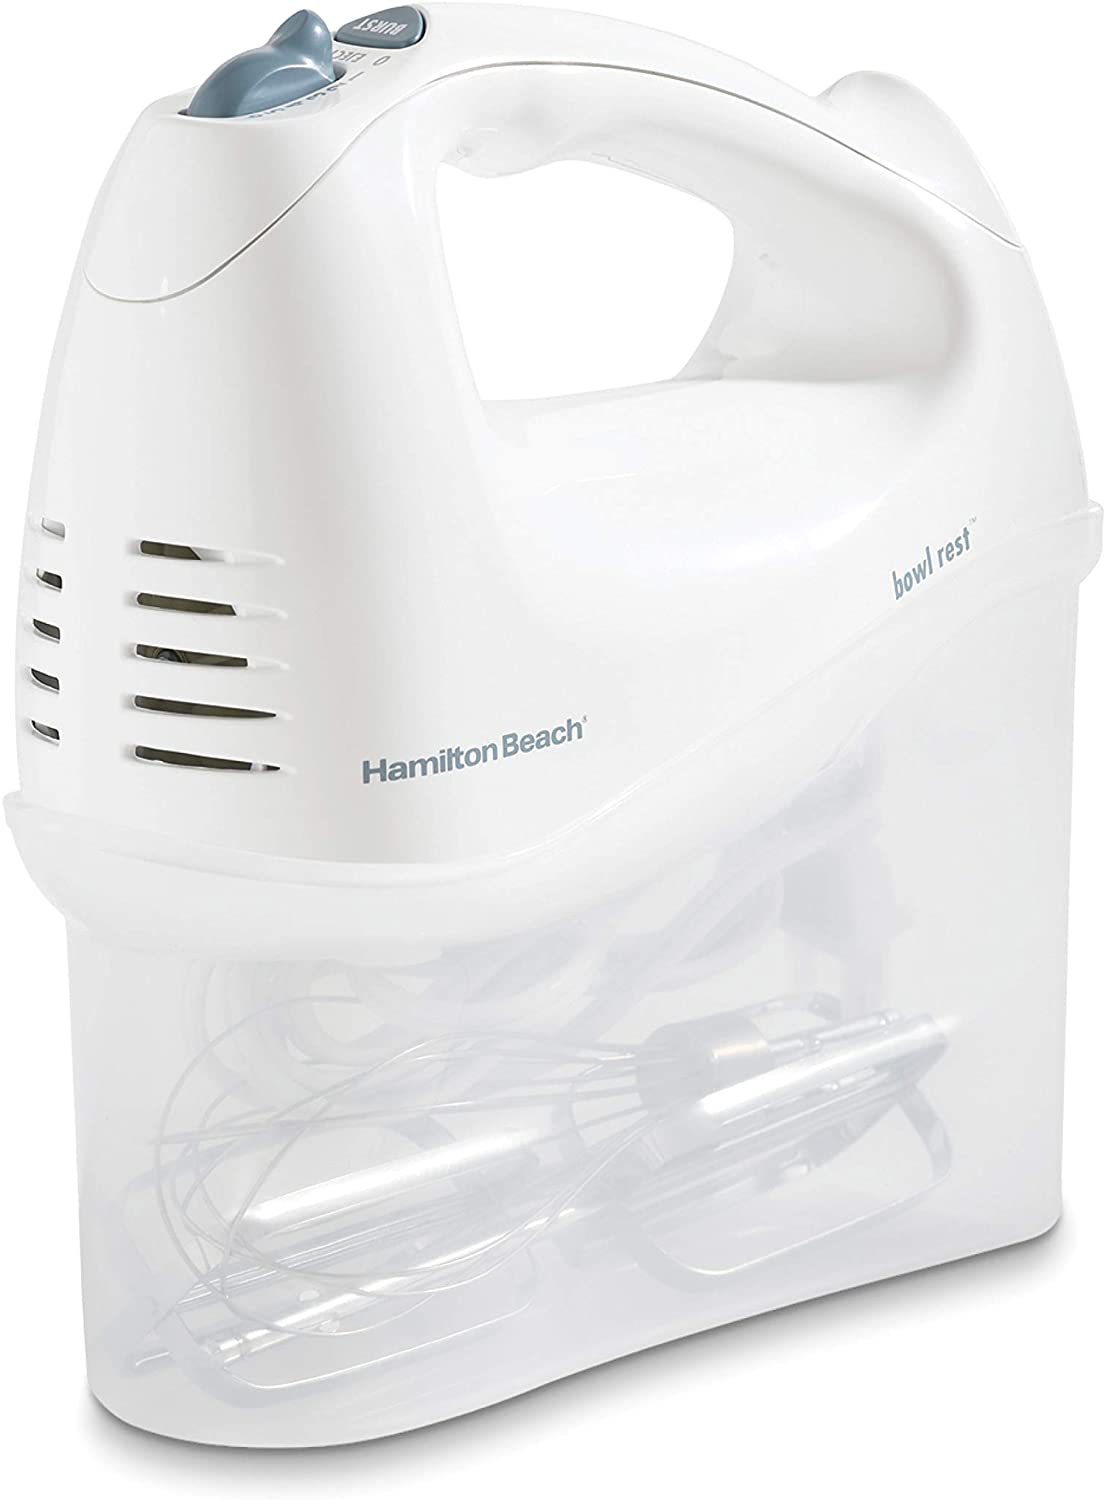 Hamilton Beach 6-Speed Electric Hand Mixer with Snap-On Case, Beaters, Whisk